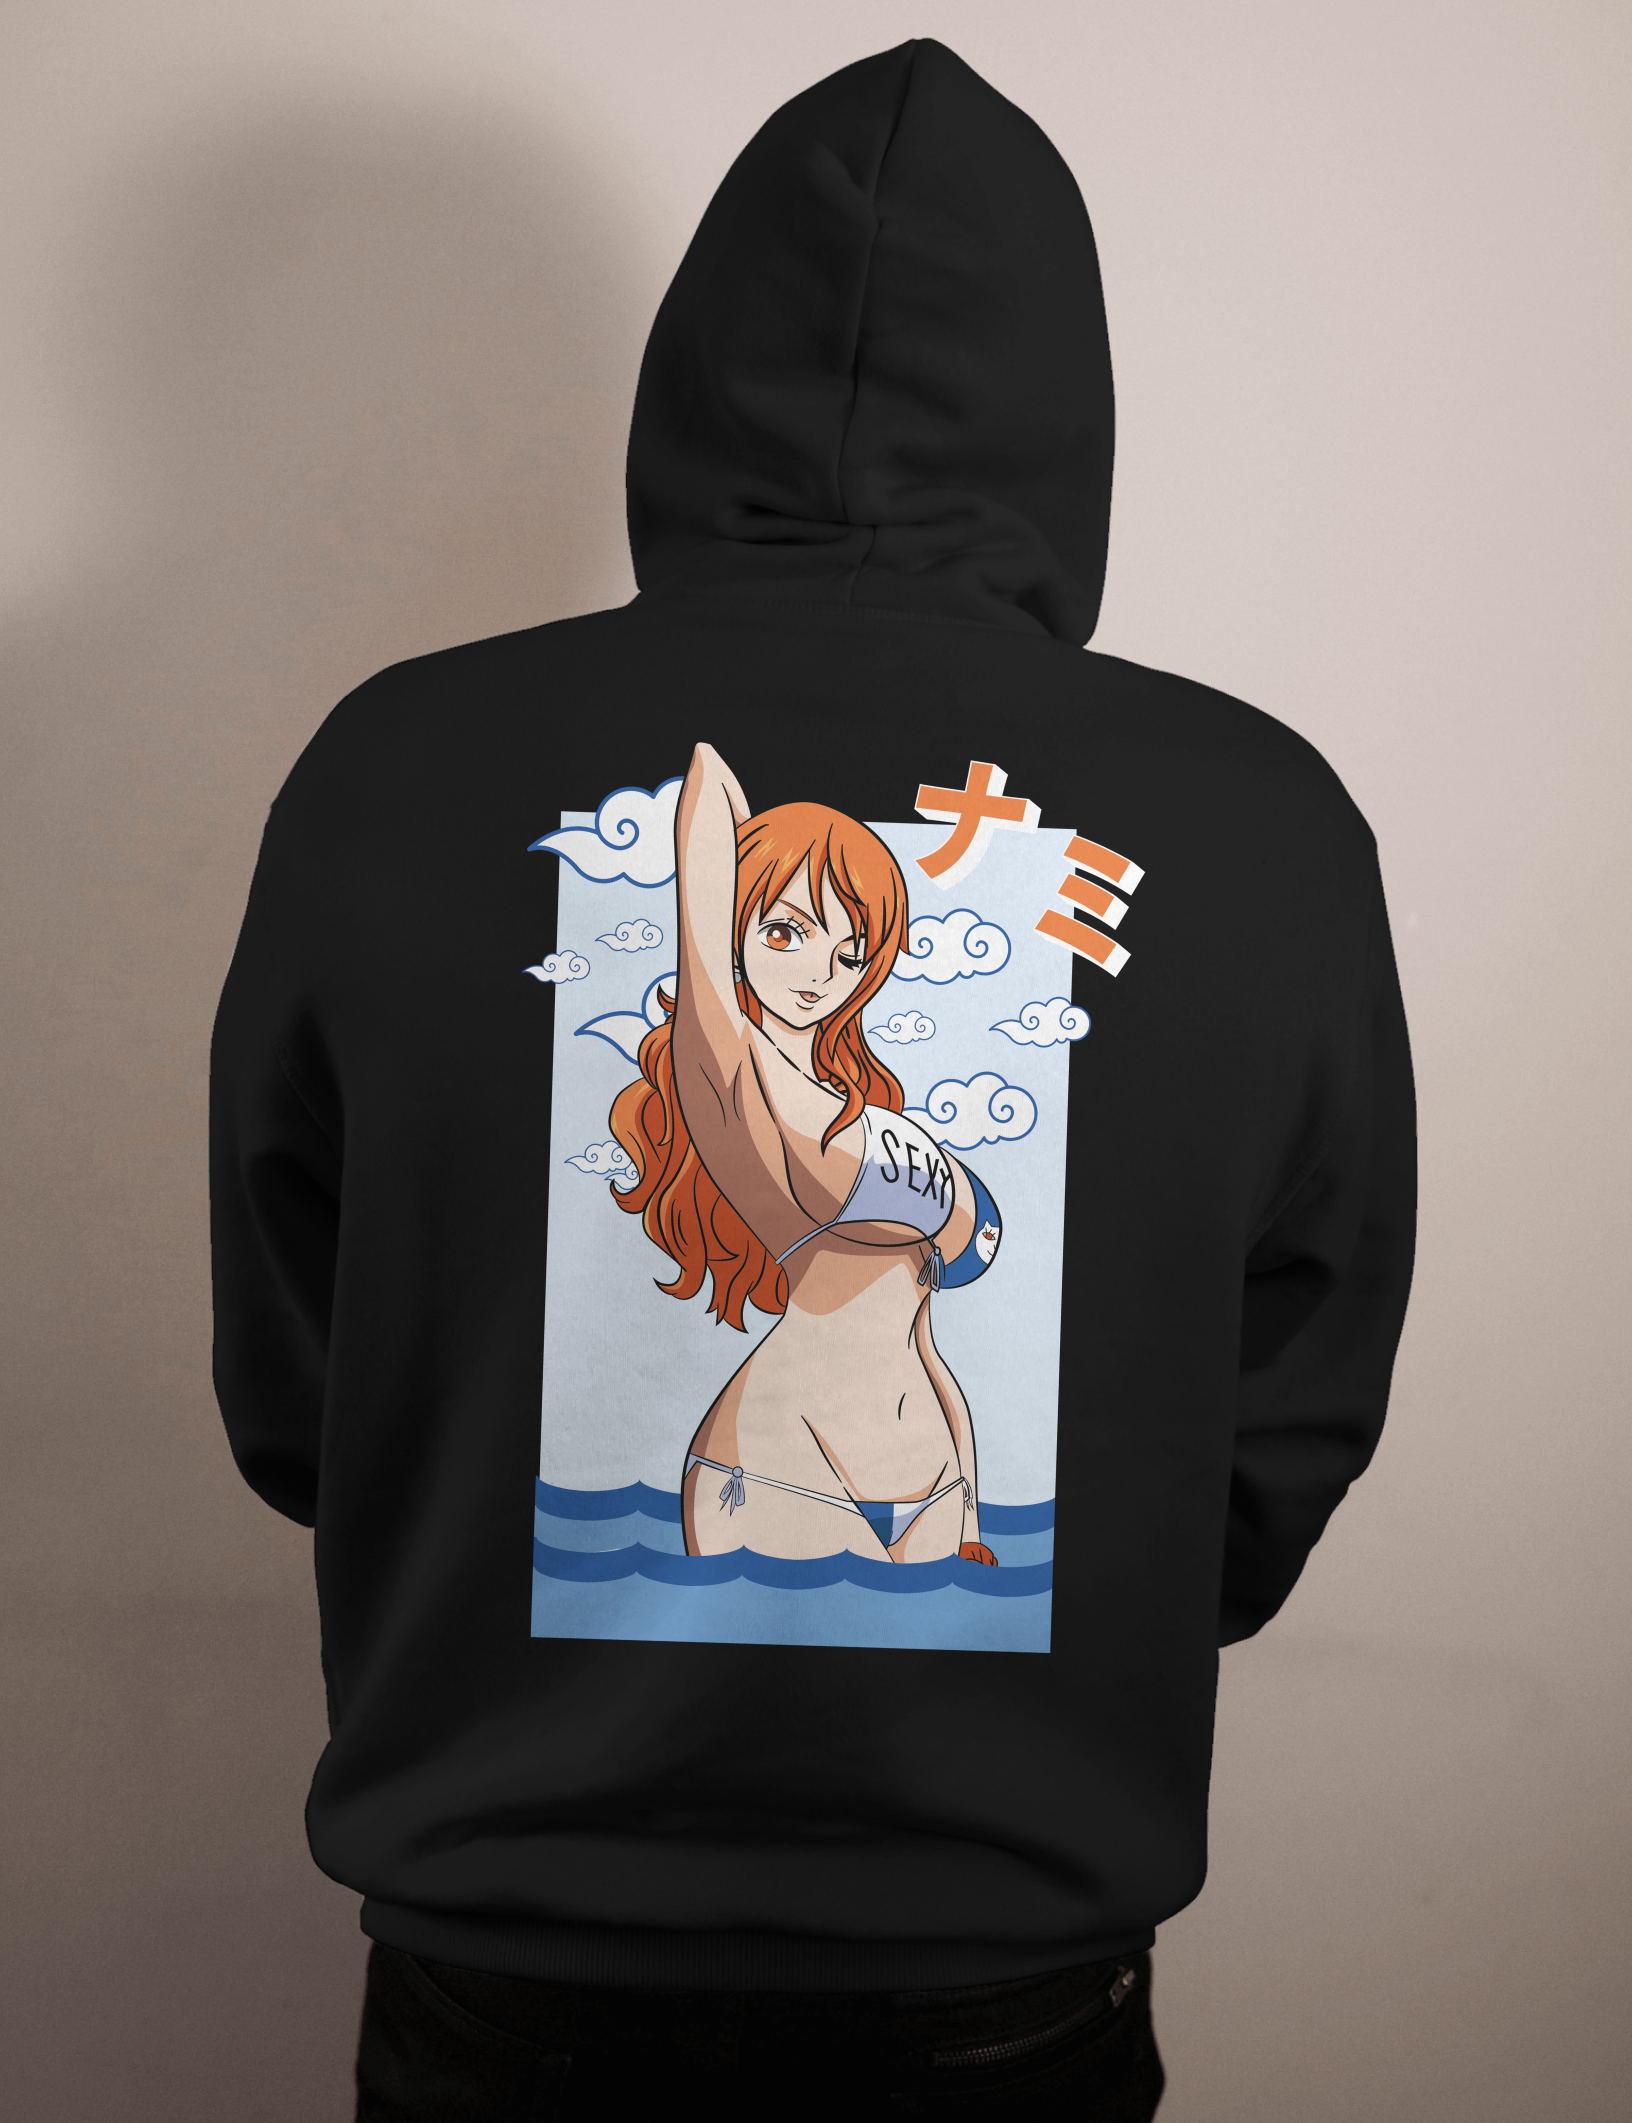 shop and buy one piece anime clothing nami hoodie